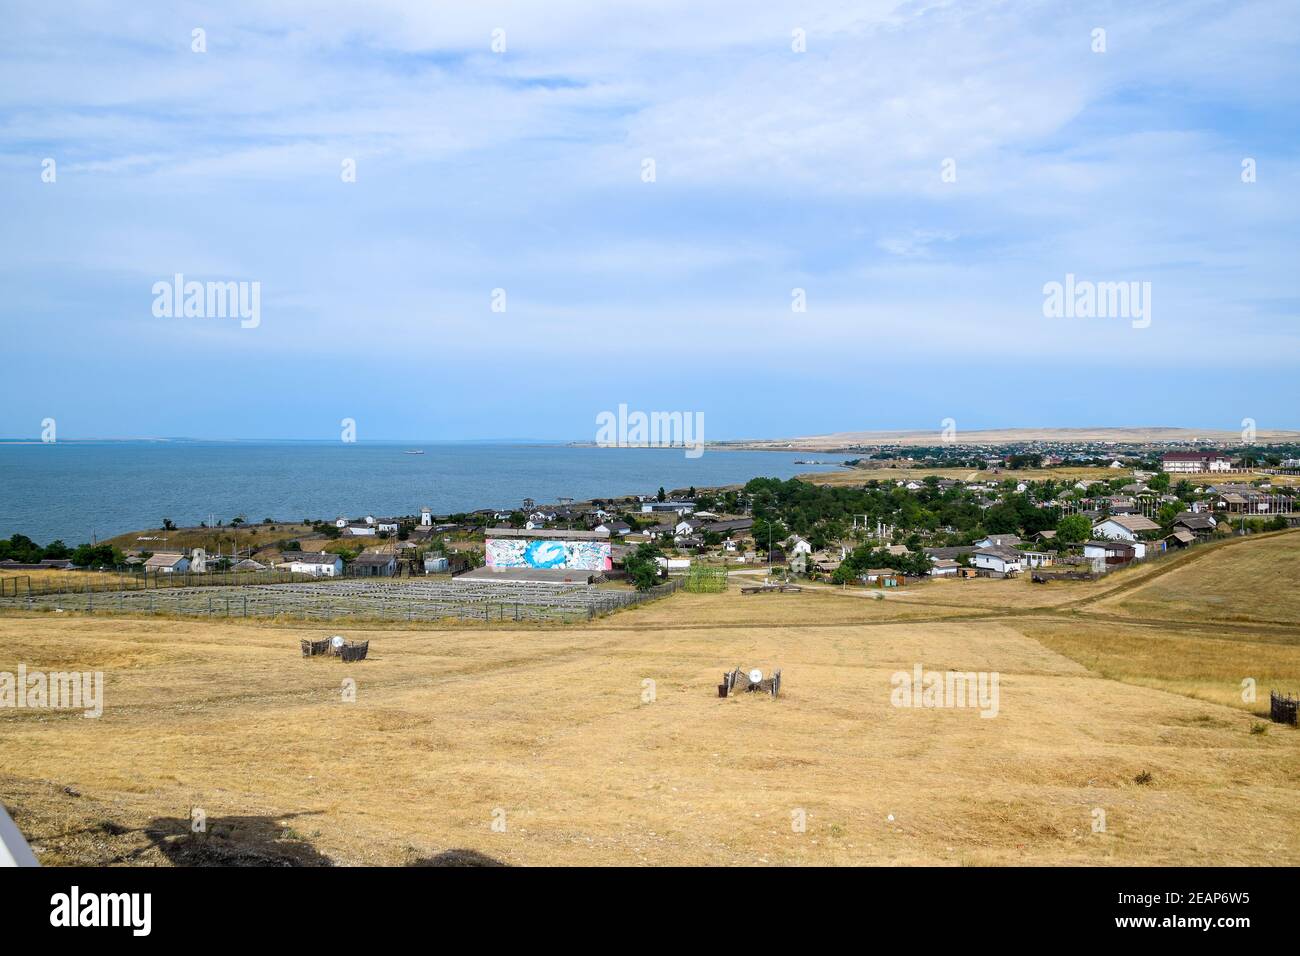 The landscape at the Cossack village - a museum Ataman. the village and the sea view from the heights of the hill. Stock Photo